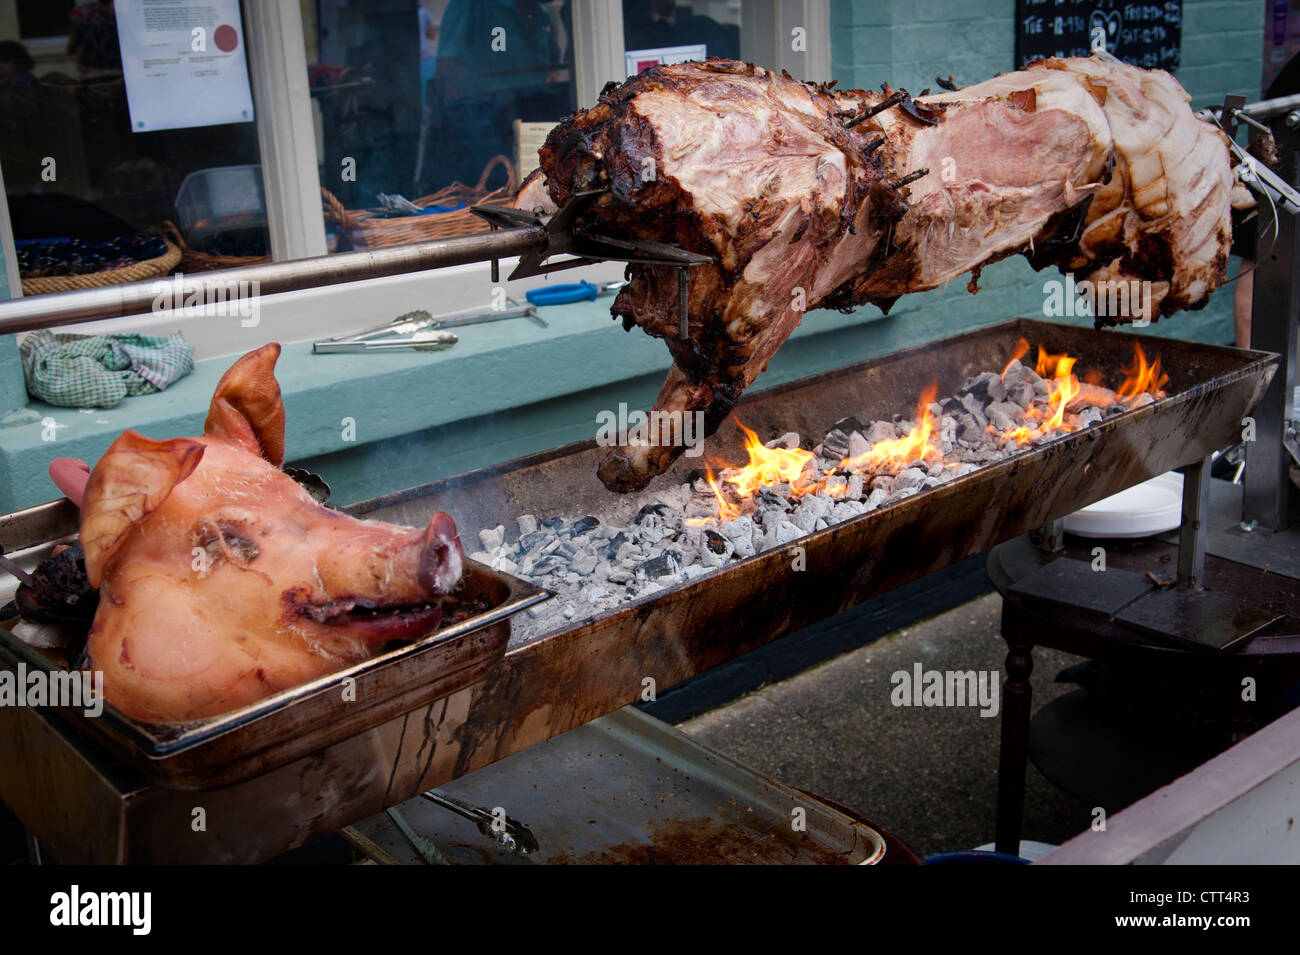 Hog spit roast on a barbecue with a pig's head in the foreground Stock Photo